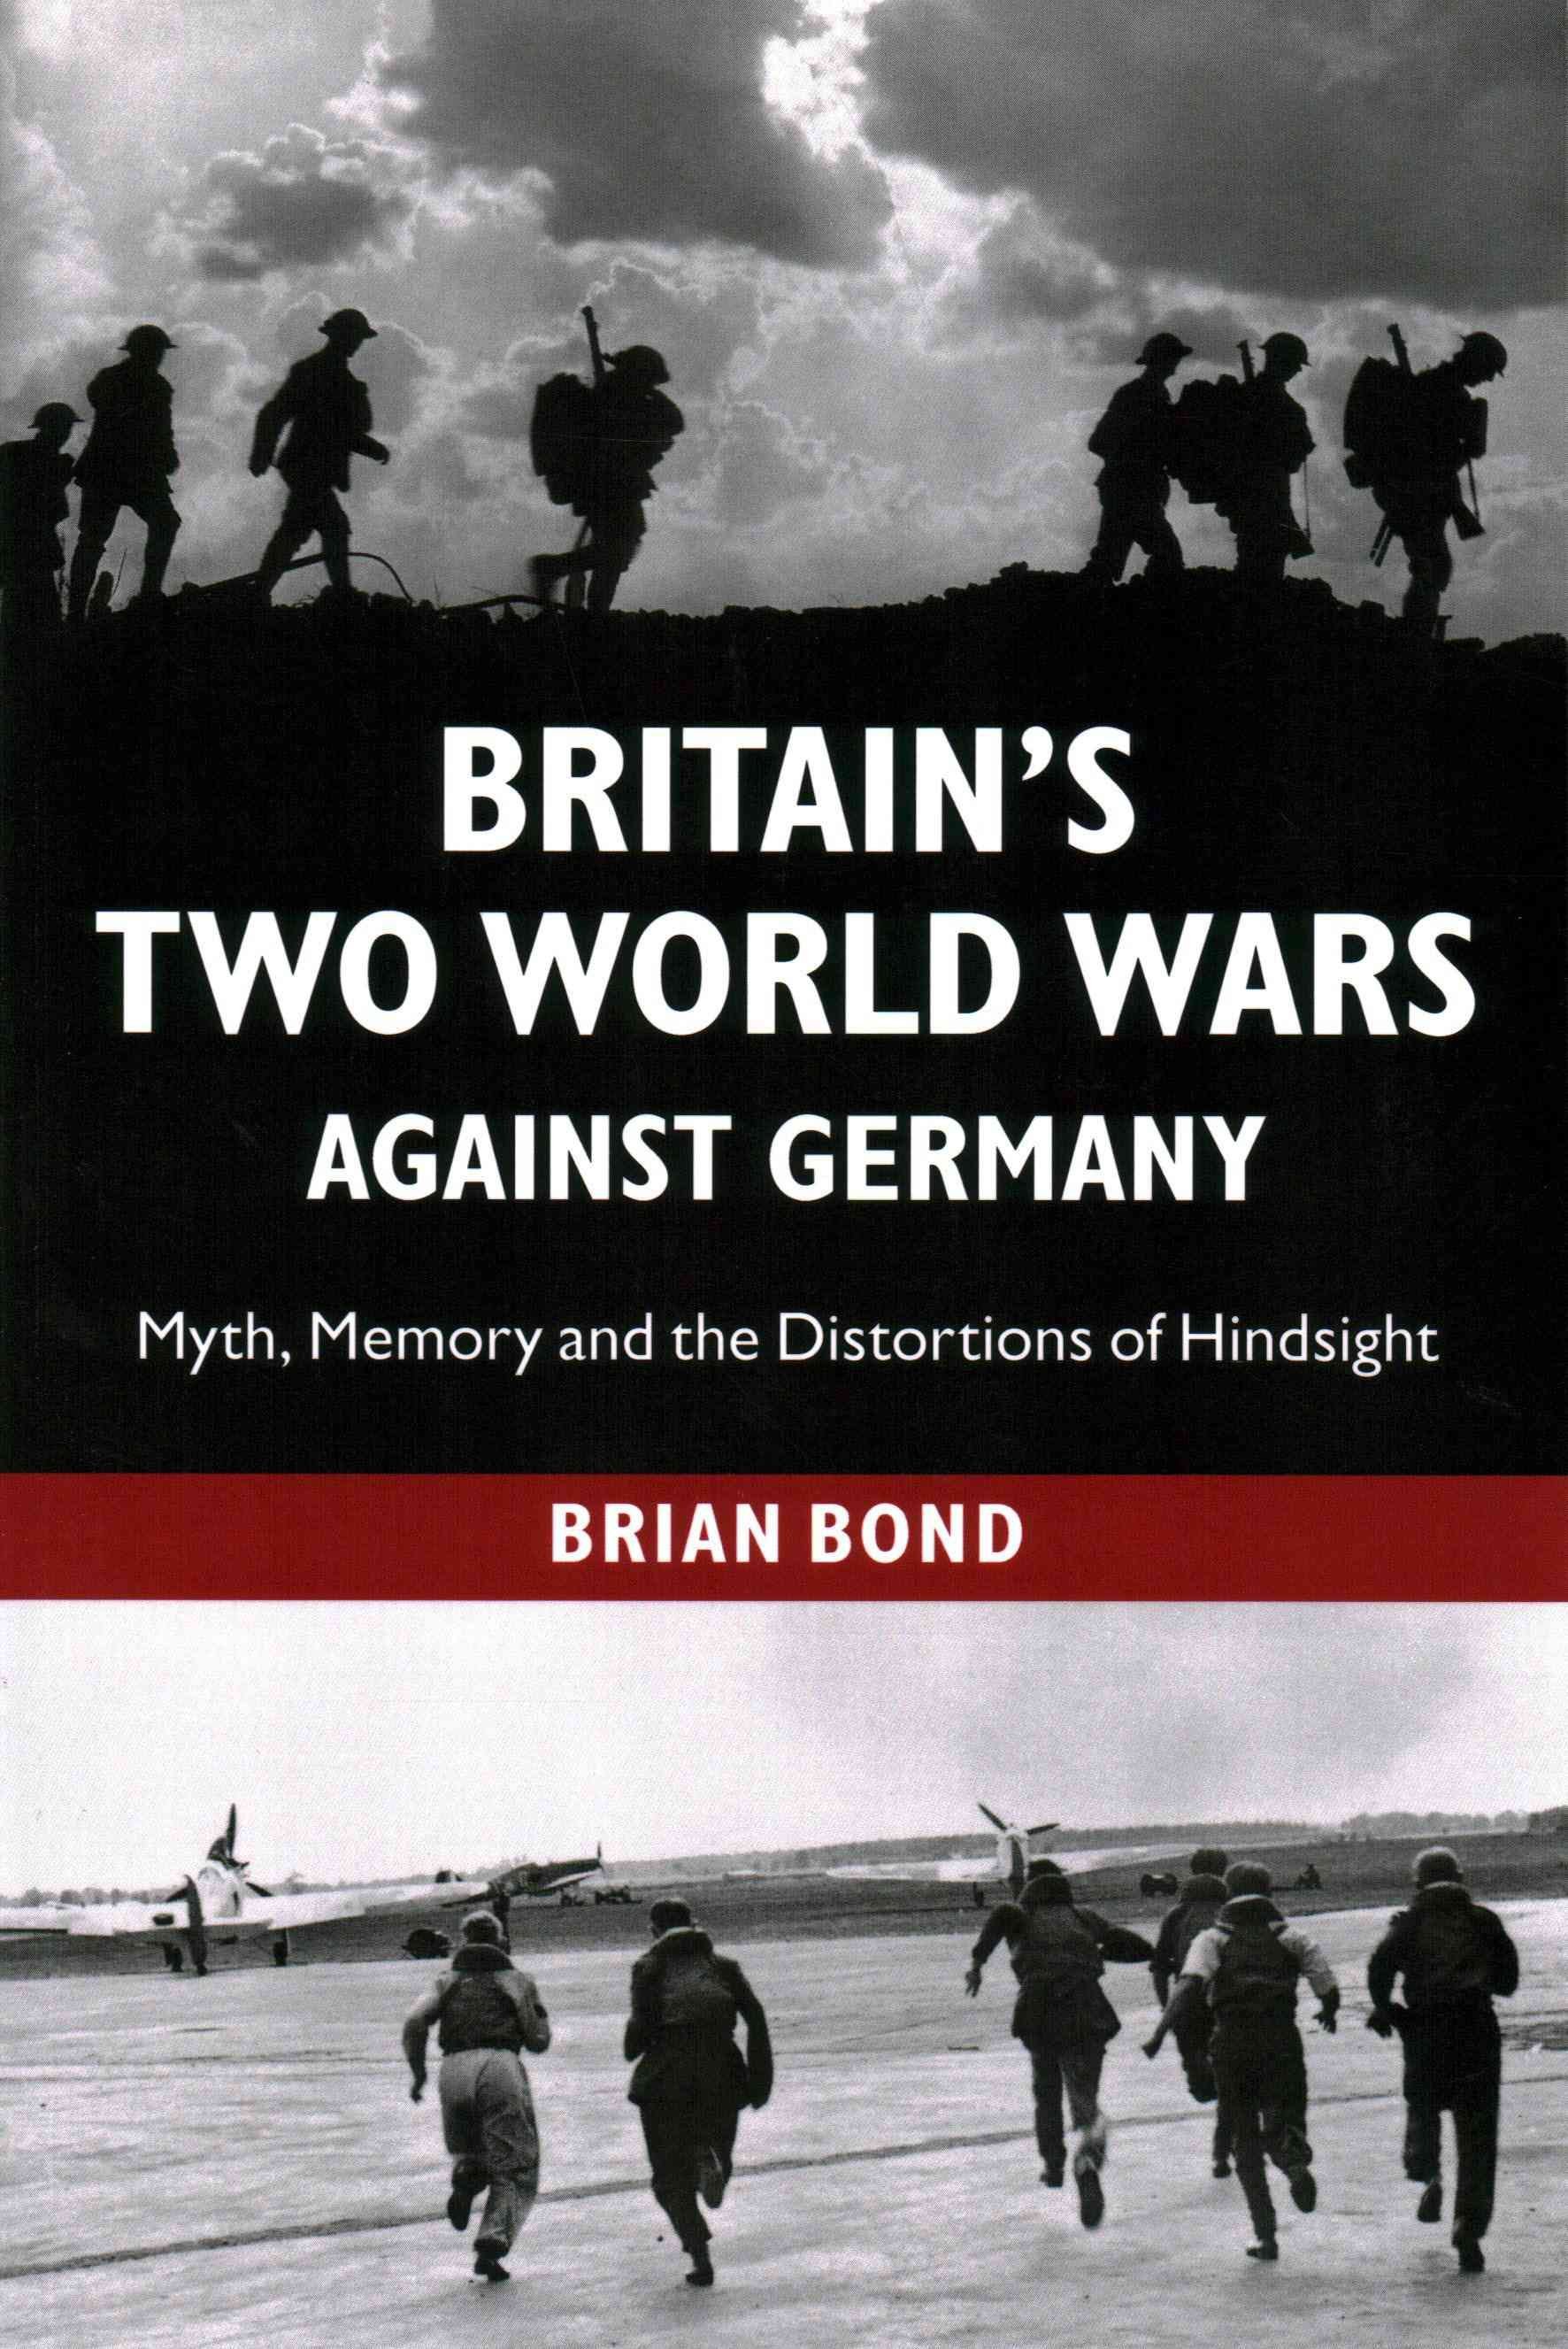 Britain's Two World Wars against Germany